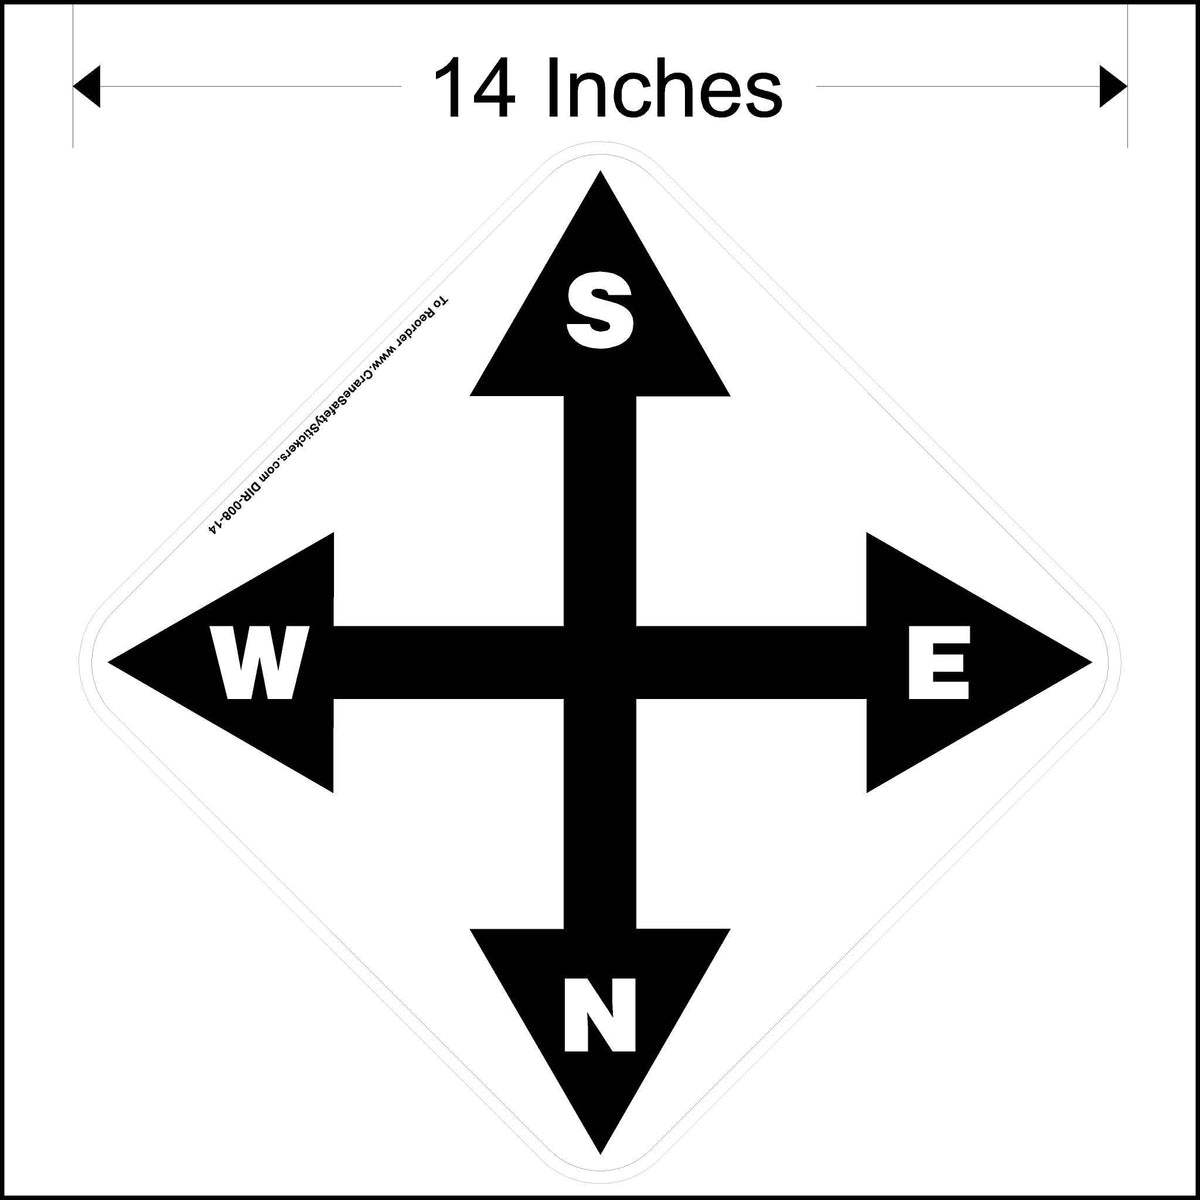 14 Inch South, east, north, and west overhead crane directional decal. Printed in black and white.